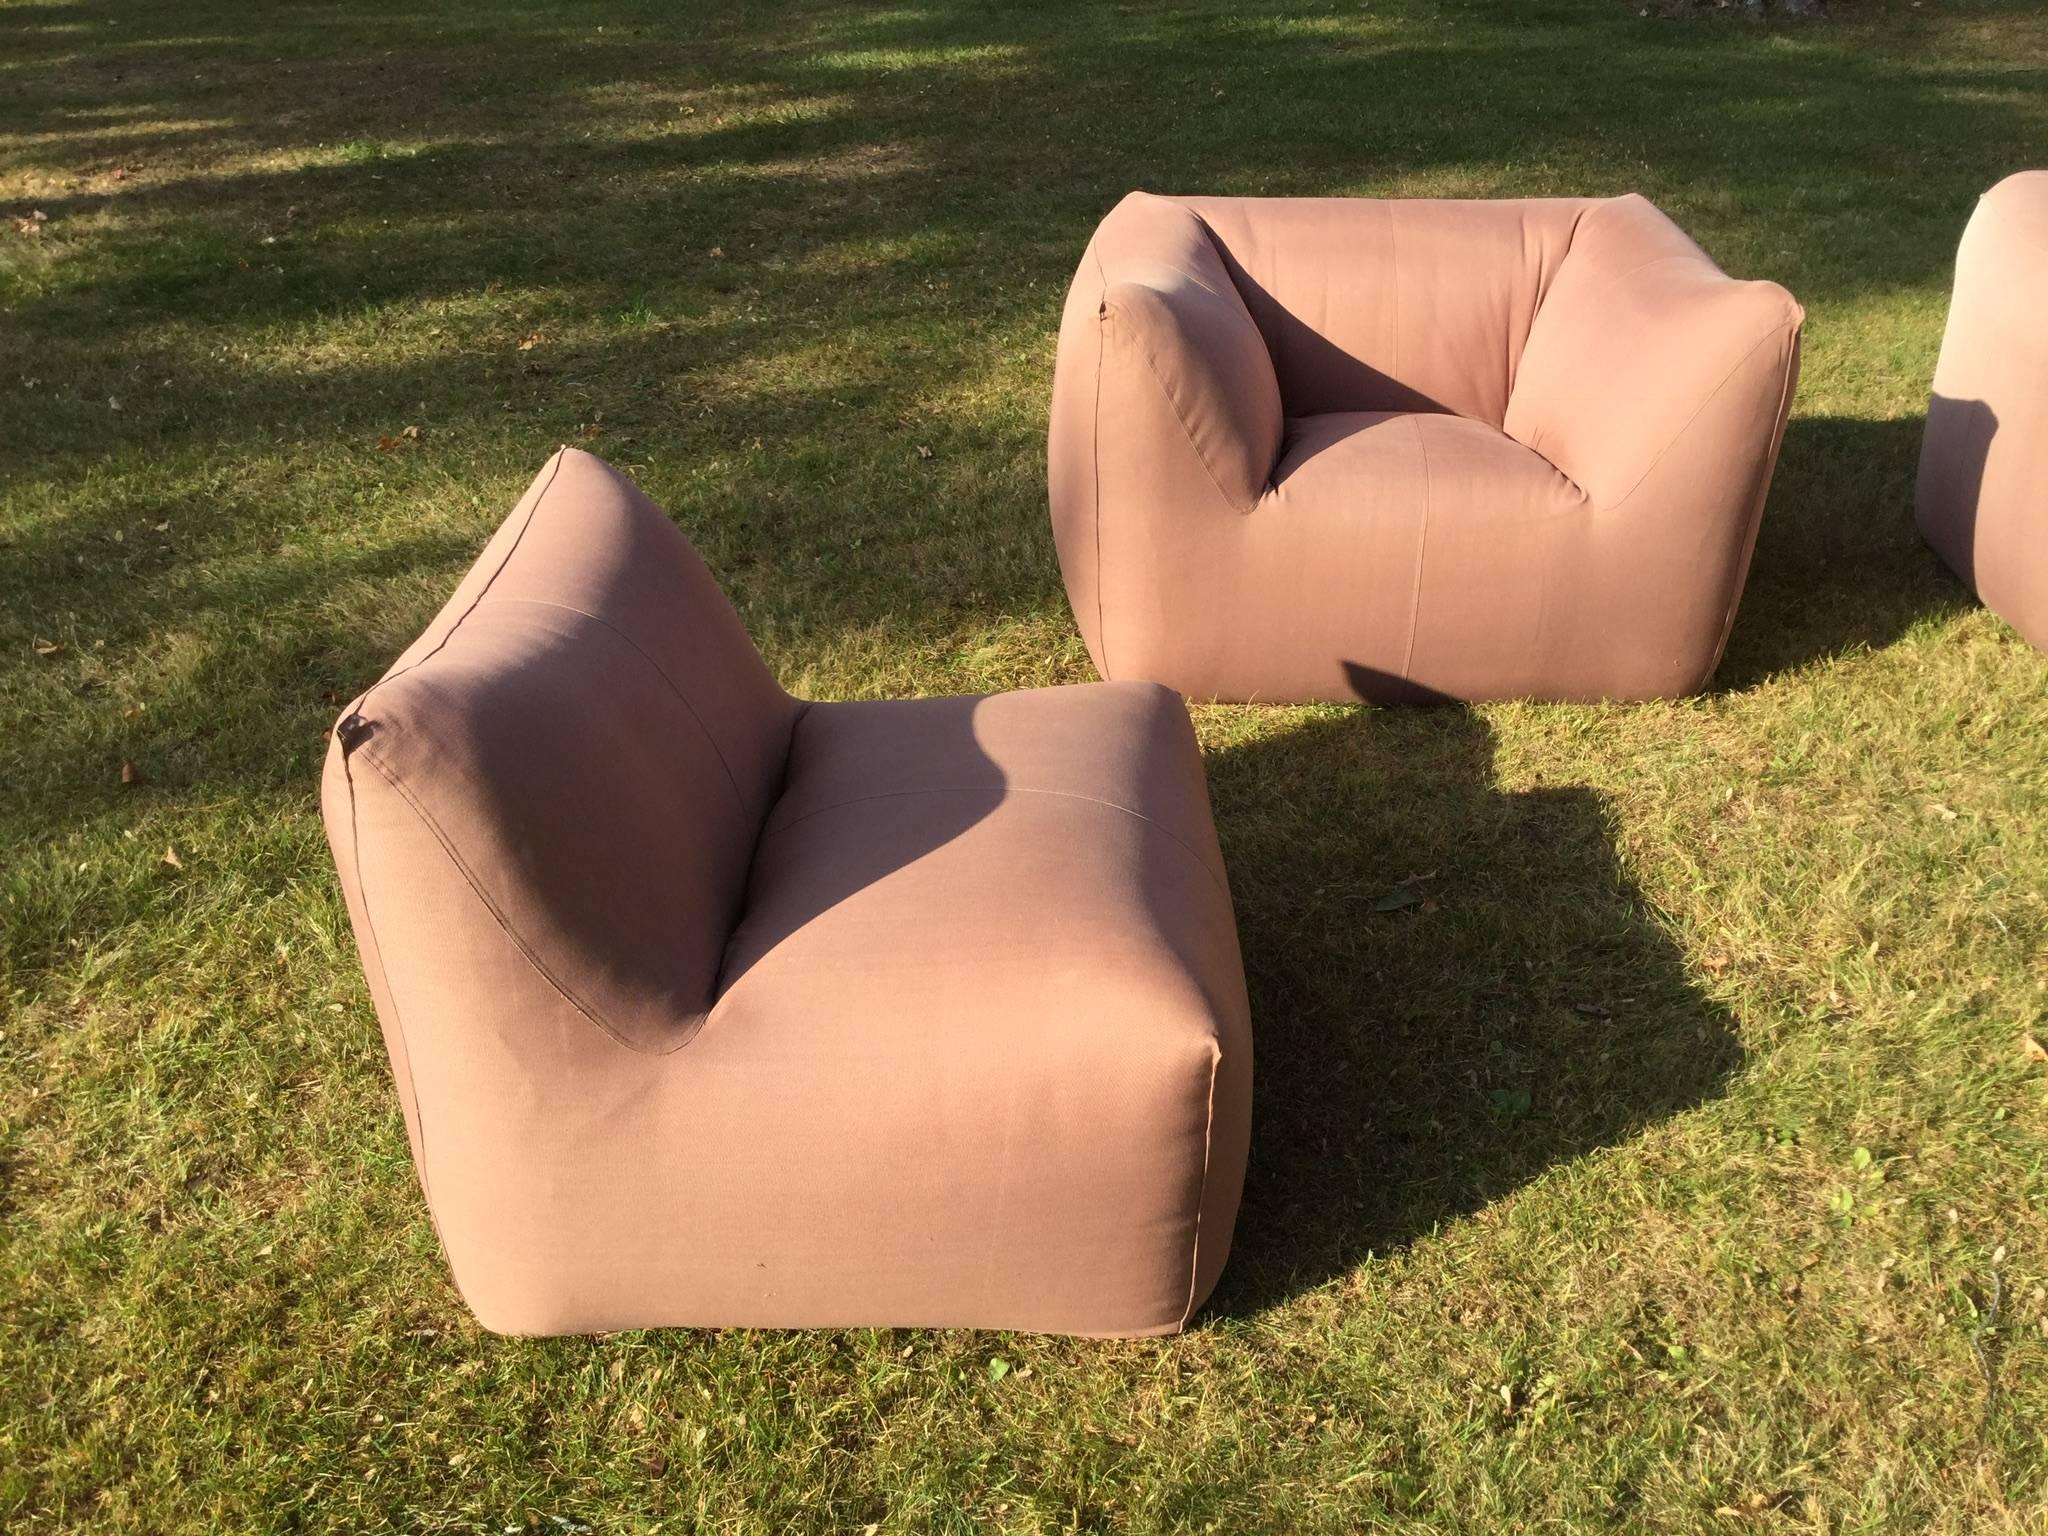 1976 first run sofa set my by Mario Bellini.
Rare and quite collectible, this set consists of two generous size armchairs and two slipper chairs. Slipper chairs can be connected to firm a loveseat.
The upholstery is original, definitely usable;